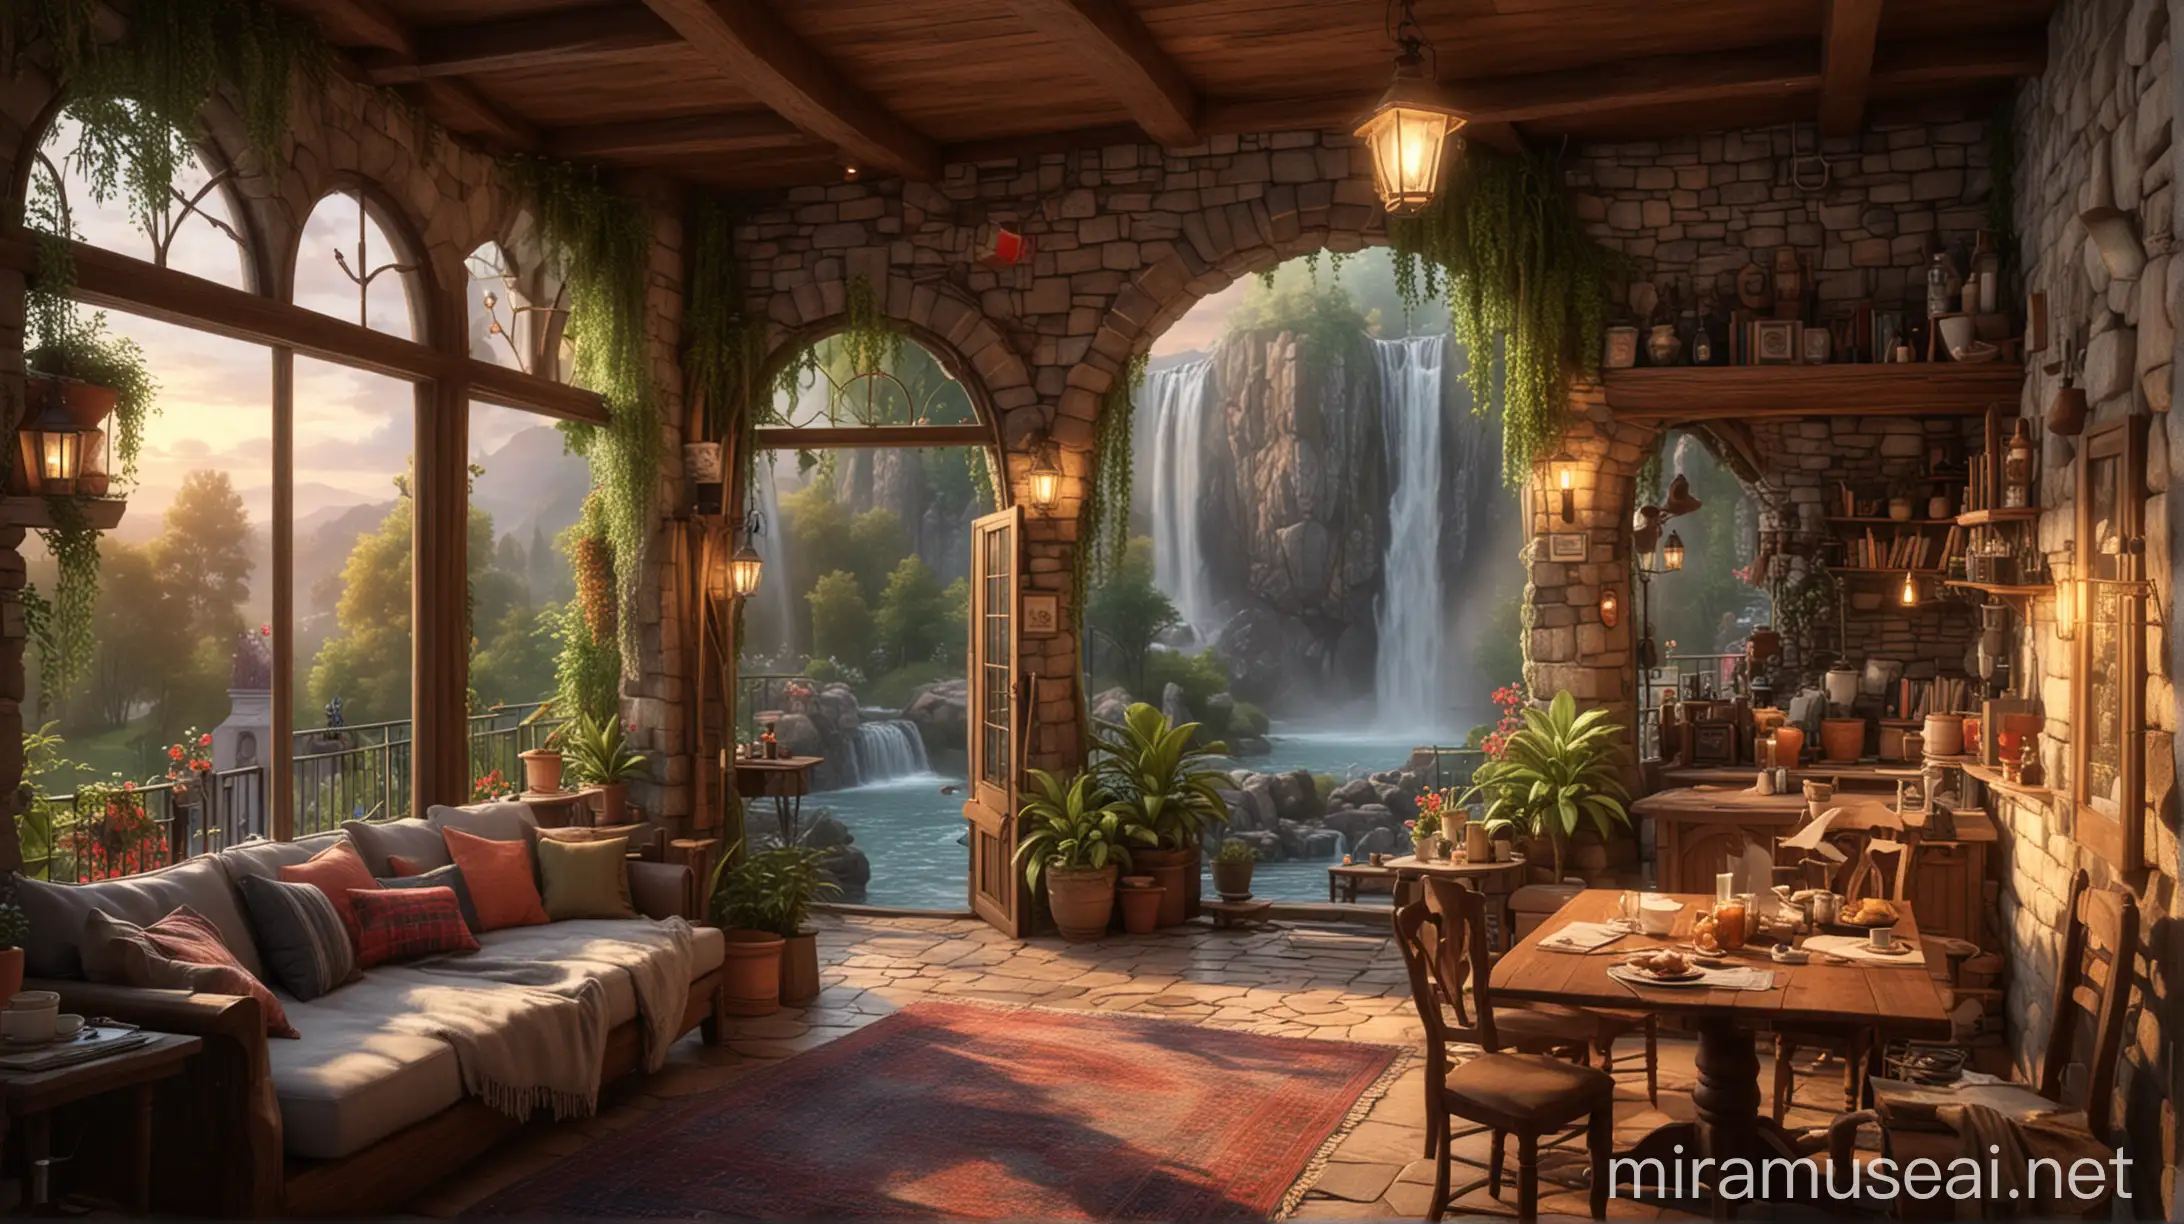 Cozy Living Room with Enchanting Waterfall Feature